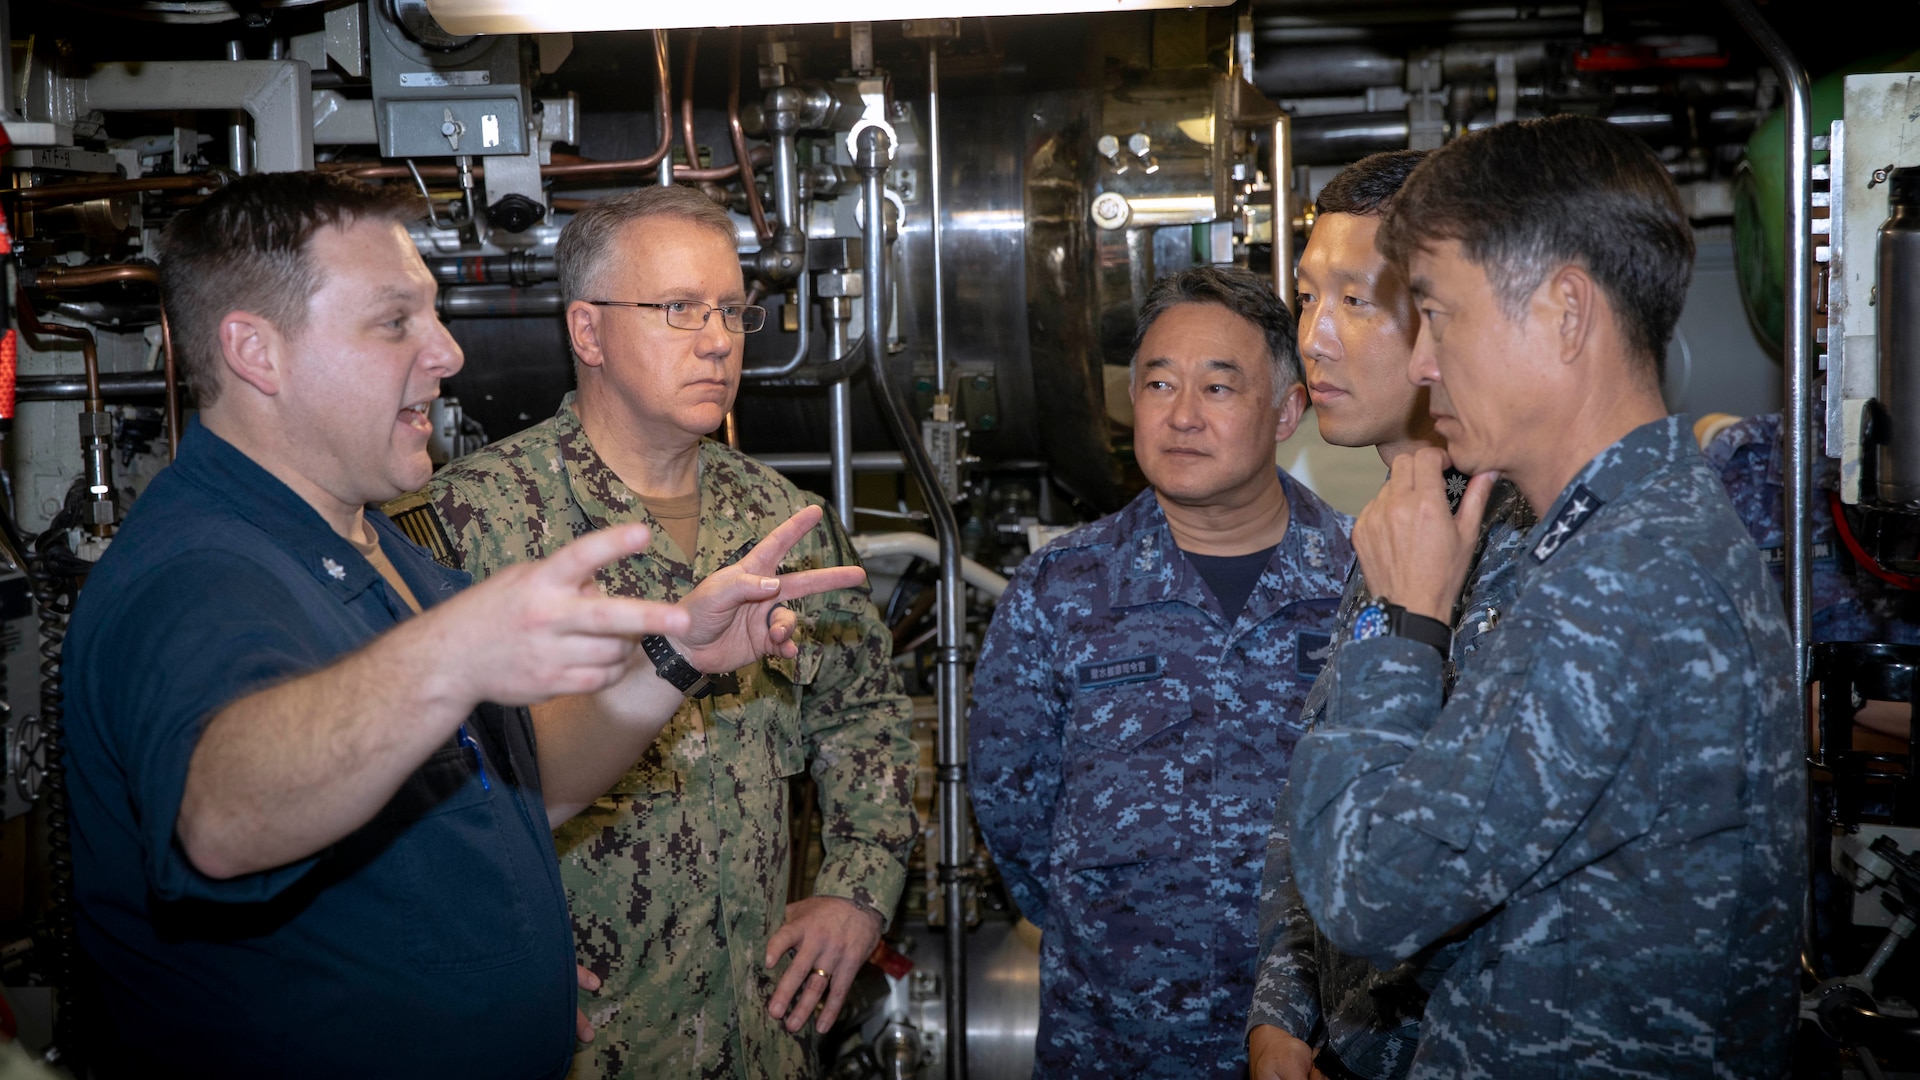 U.S. Navy Cmdr. Travis Wood, commanding officer of Ohio-class ballistic-missile submarine USS Maine (SSBN 741), Gold Crew, left; speaks with U.S. Navy Rear Adm. Rick Seif, commander, Submarine Group 7, second from left; Japan Maritime Self-Defense Force Vice Adm. Tateki Tawara, commander, Fleet Submarine Force, center; Republic of Korea (ROK) Navy Rear Adm. Su Youl Lee, commander, Submarine Force, far right; and ROK Navy Lt. Cmdr. Dongkeon Oh, executive officer of ROK Navy submarine ROKS SON WON IL (SS-072); during an underway embark in vicinity of Guam aboard Maine, April 18. During their time at sea aboard the submarine, the senior leaders were provided tours and demonstrations of the unit’s capabilities, which operates globally under U.S. Strategic Command.